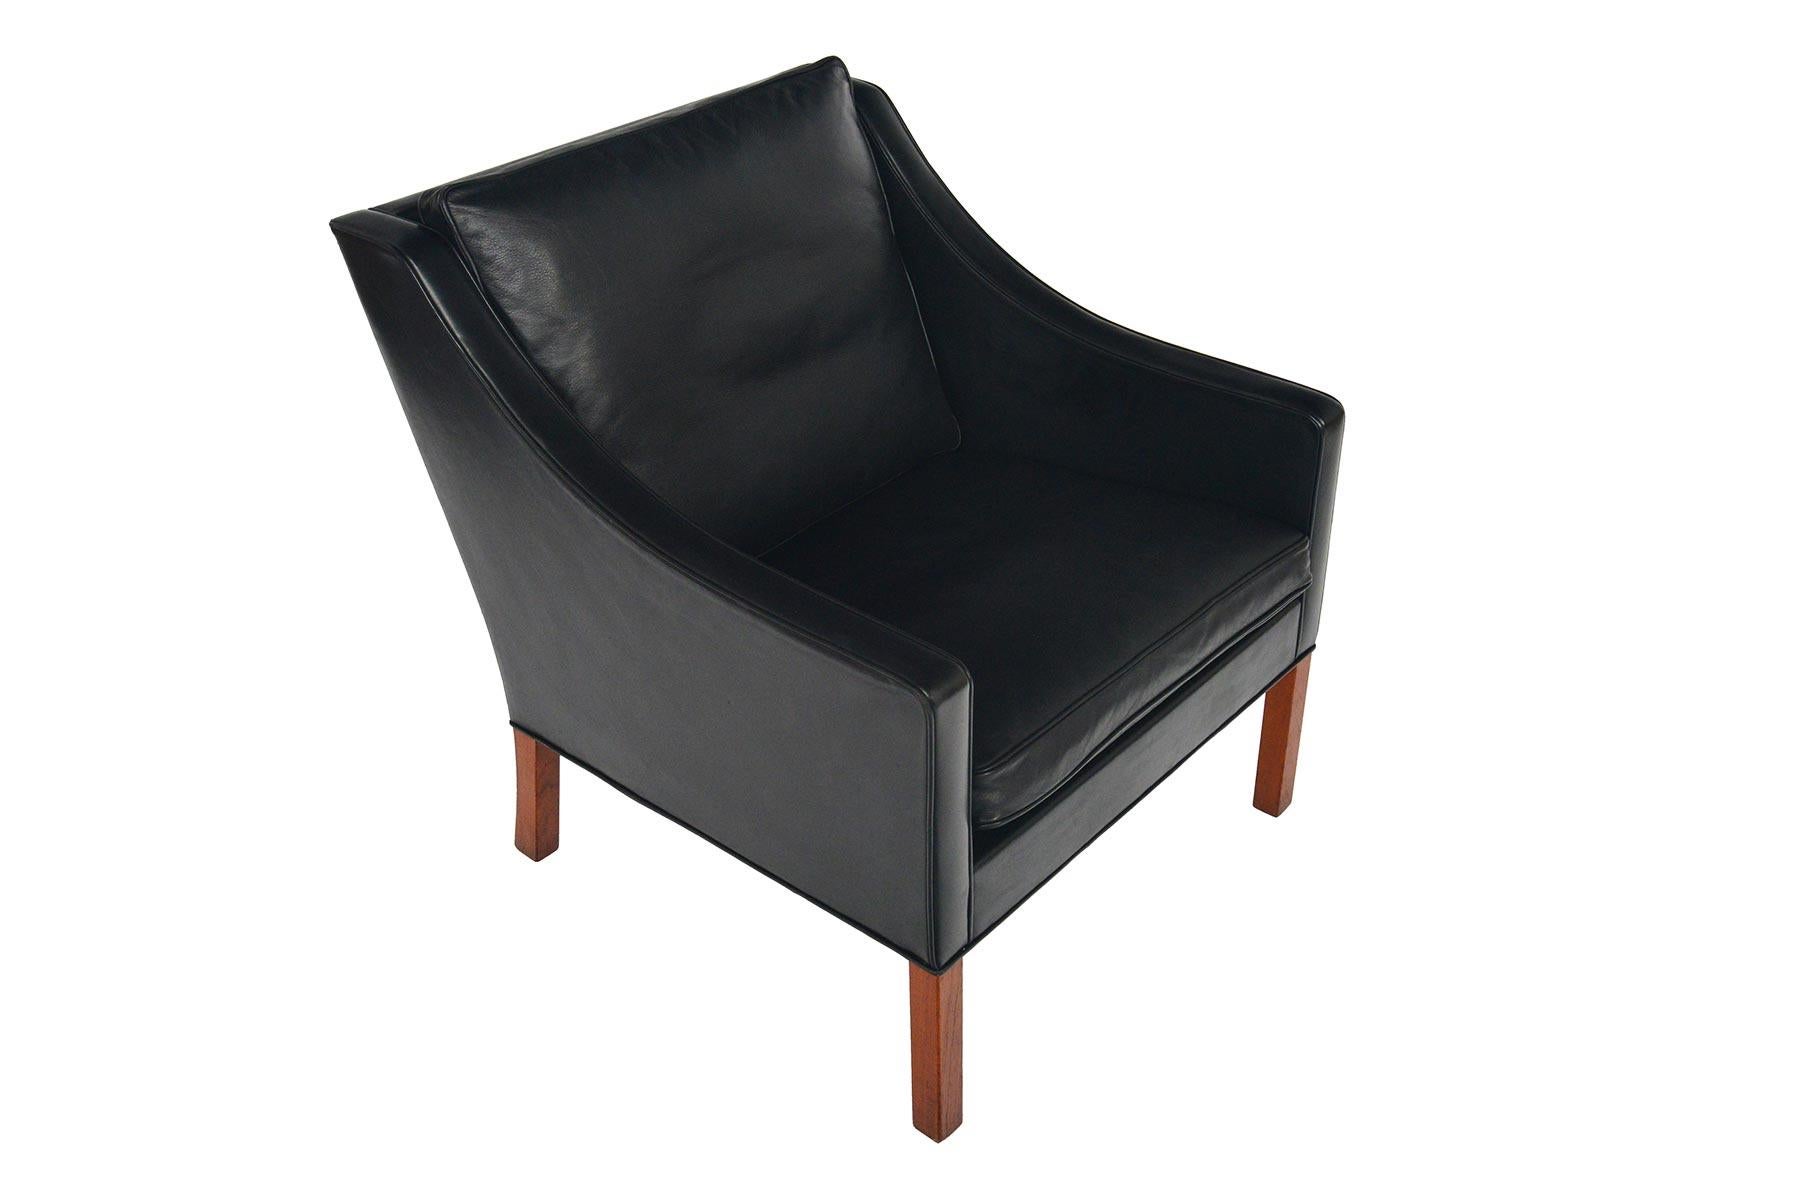 This handsome black leather lounge chair, model 2207, was designed by Børge Mogensen for Fredericia Stolefabrik in 1963. The perfect companion to the model 2213 three-seat sofa of the same collection, this sleek chair features a lowback design with